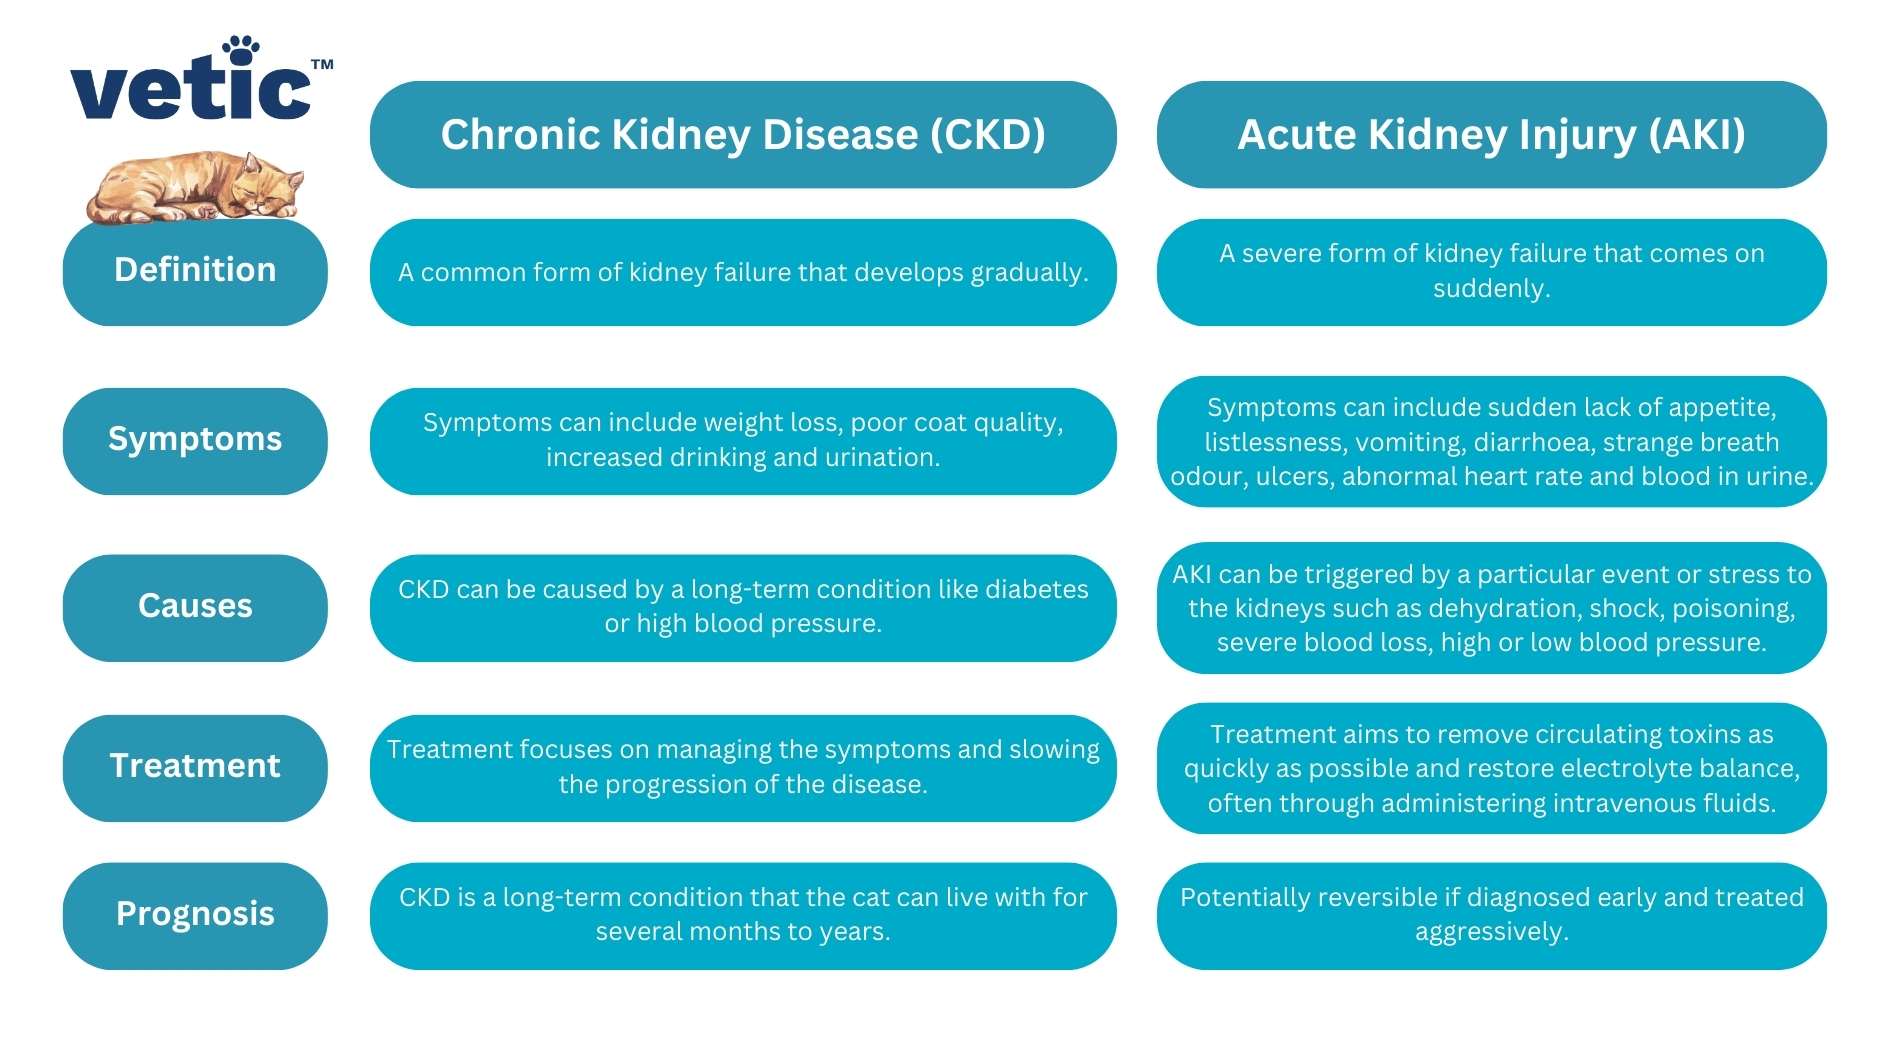 Infographic titled: Kidney disease in cats (CKD vs. AKI) CKD and AKI stand for Chronic Kidney Disease and Acute Kidney Injury respectively. The table compares the definitions, signs, causes, treatment and prognoses of CKD and AKI. Chronic Kidney Disease (CKD) Acute Kidney Injury (AKI) Definition A common form of kidney failure that develops gradually. A serious and usually severe form of kidney failure that comes on suddenly. Symptoms Symptoms may be less severe than AKI and can include weight loss, poor coat quality, increased drinking and urination. Symptoms can include sudden lack of appetite, listlessness, vomiting, diarrhoea, strange breath odour, ulcers, low blood pressure, rapid or slower than normal heart rate, seizures, and changes in urination. Causes CKD can be caused by a long-term condition like diabetes or high blood pressure. AKI can be triggered by a particular event or stress to the kidneys such as dehydration, shock, poisoning, severe blood loss, high or low blood pressure. Treatment Treatment focuses on managing the symptoms and slowing the progression of the disease. Treatment aims to remove circulating toxins as quickly as possible and restore electrolyte balance, often through administering intravenous fluids. Prognosis CKD is a long-term condition that the cat can live with for several years with proper management. AKI is potentially reversible if diagnosed early and treated aggressively.